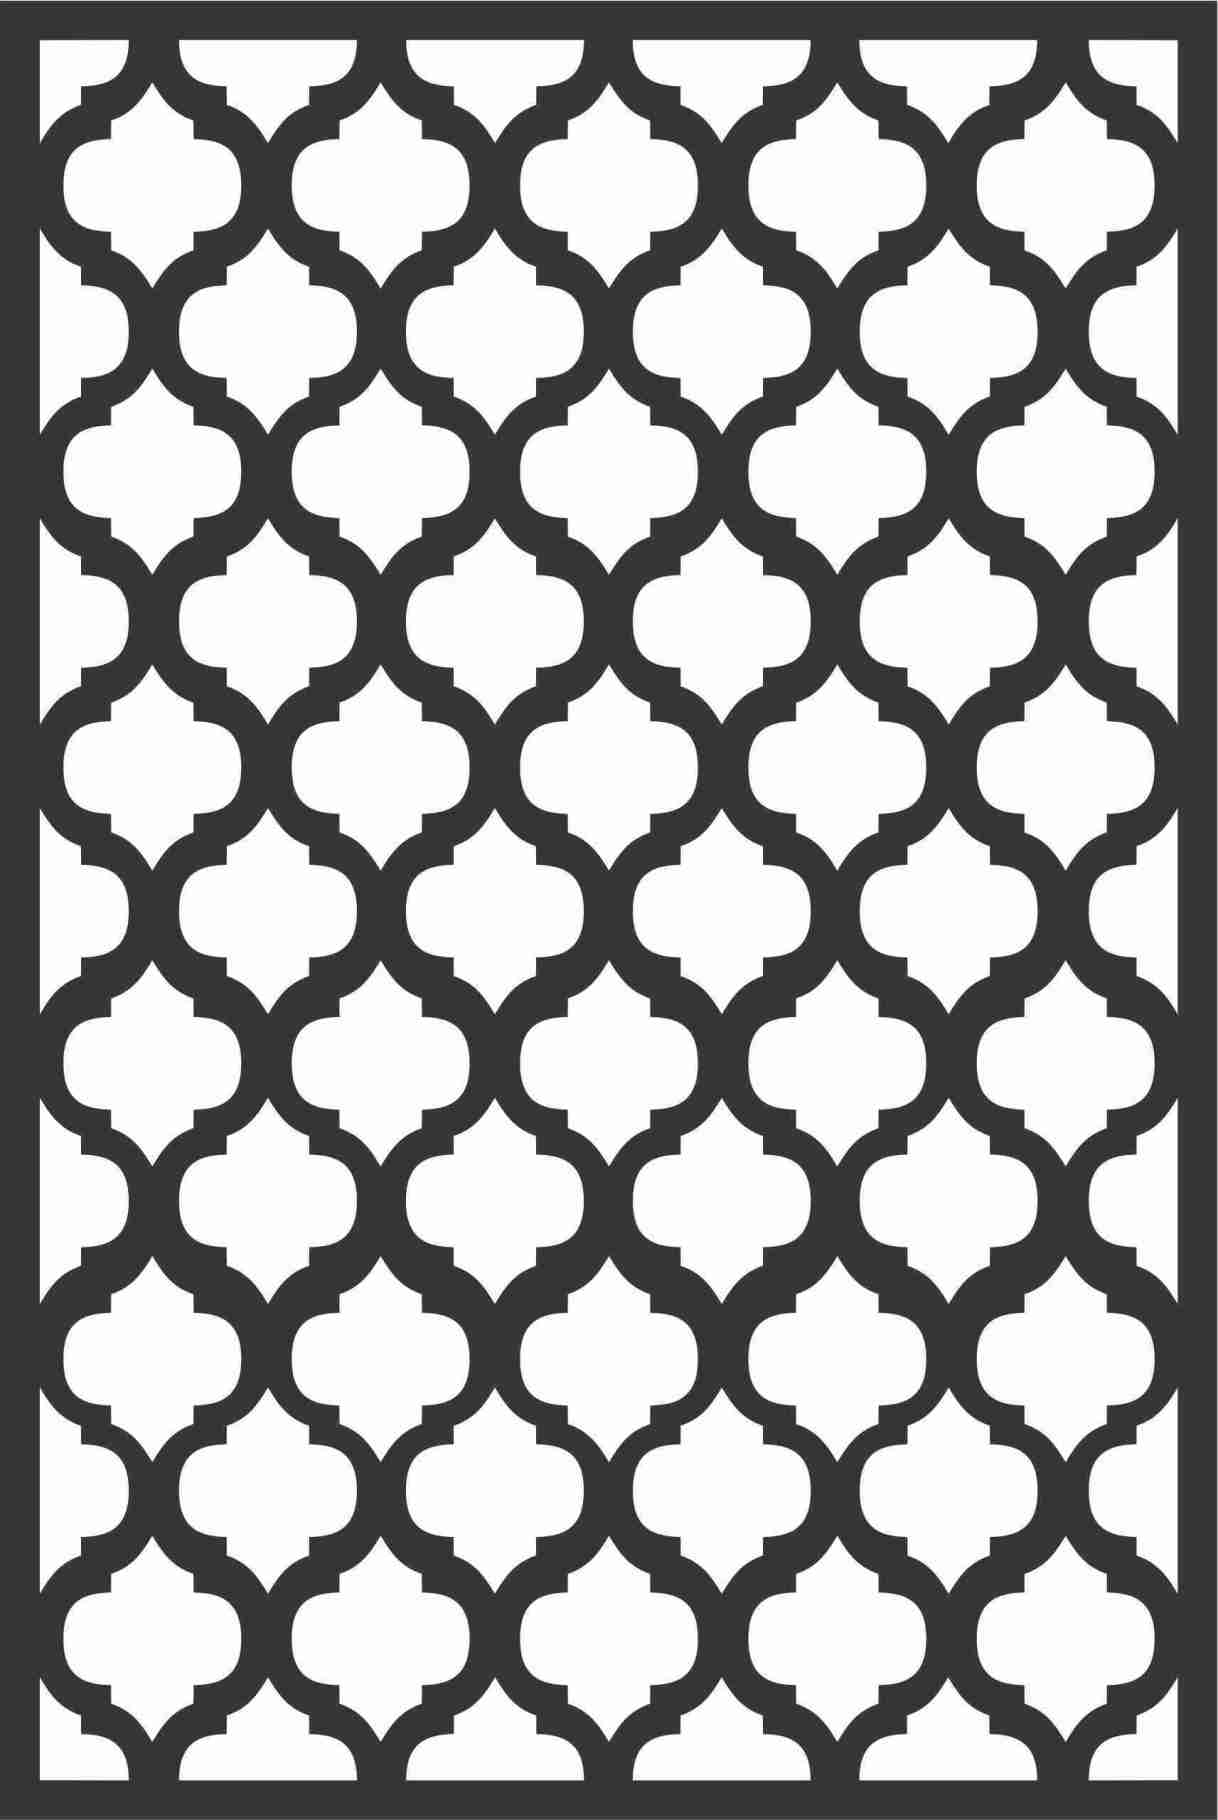 Kasbah Grill Screen Panel DXF File